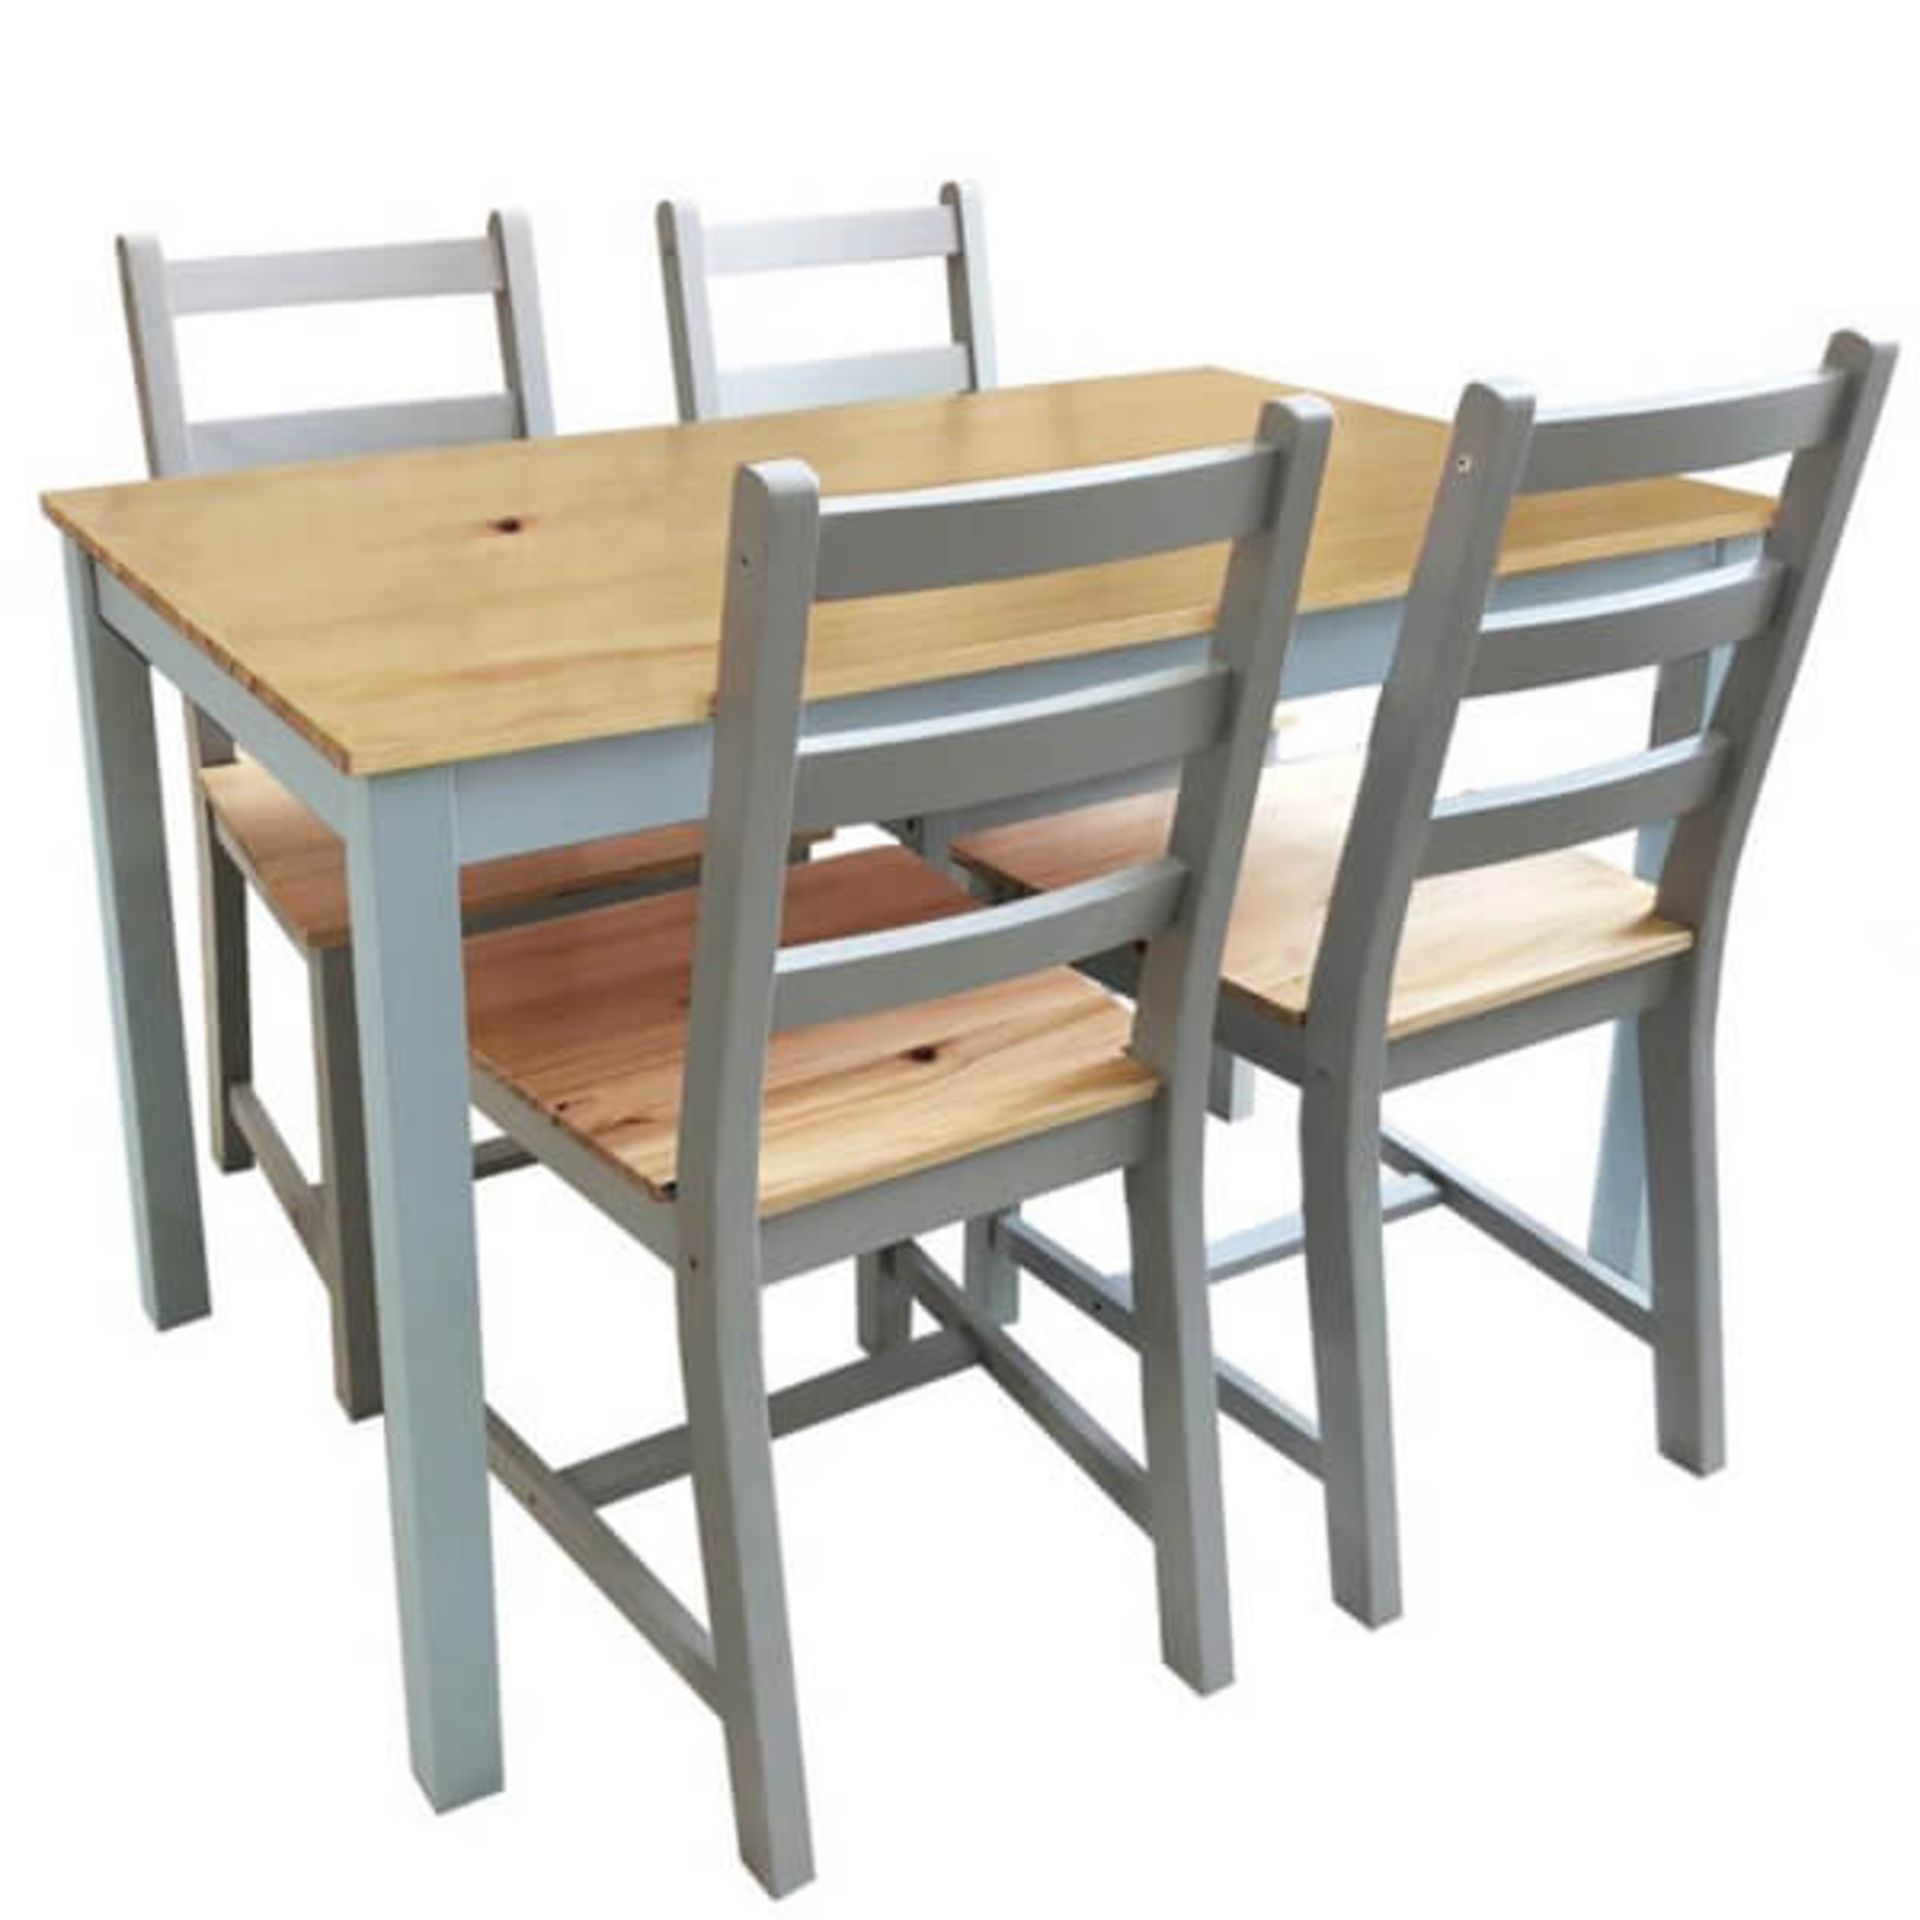 (R3O) 1x Mortimer Pine Dining Set With 4 Chairs. RRP £200.00. Unit Appears Clean, Unused. Contents - Image 2 of 5